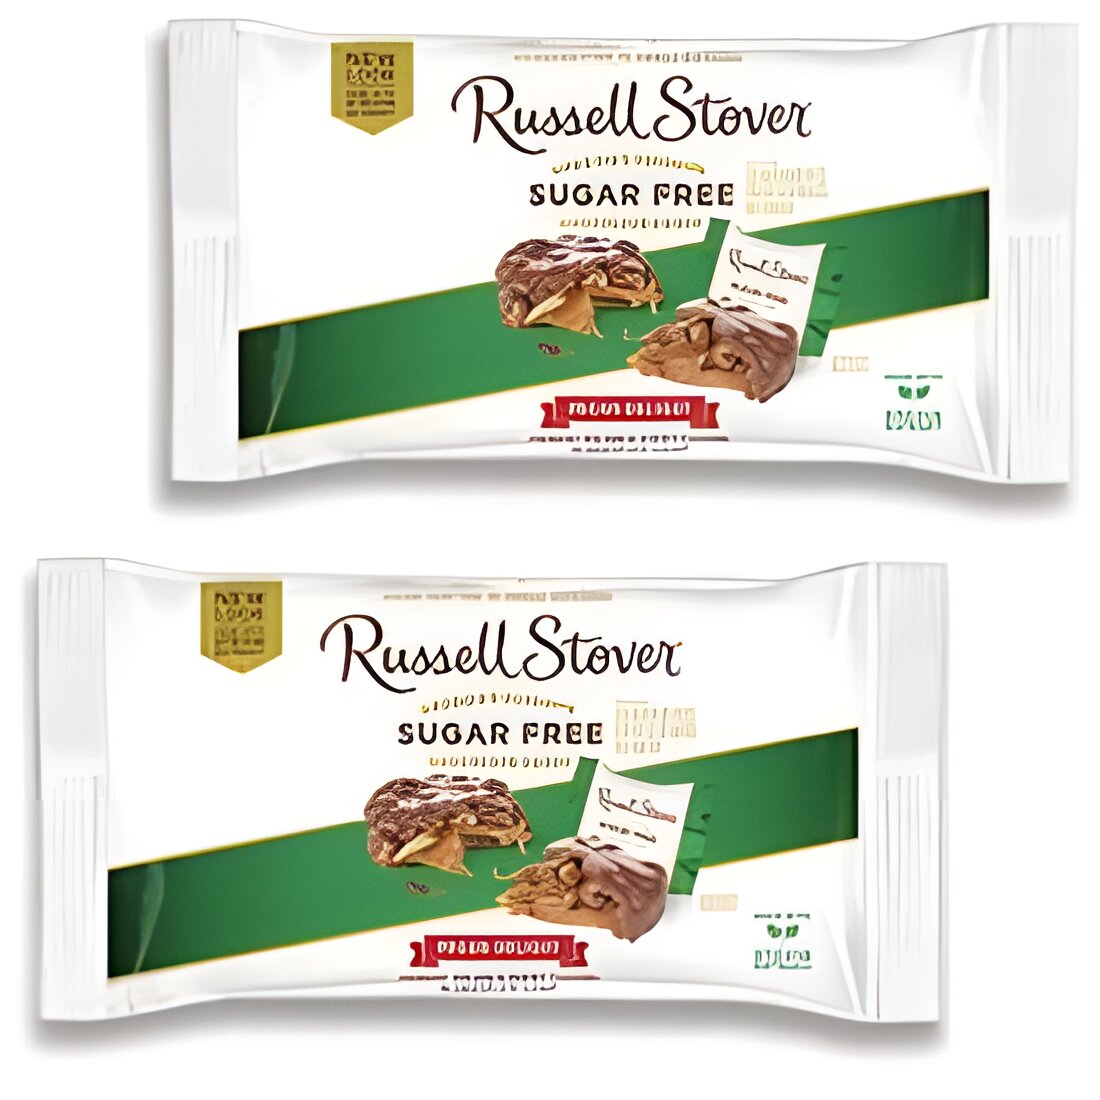 Free Russell Stover Sugar Free Sample